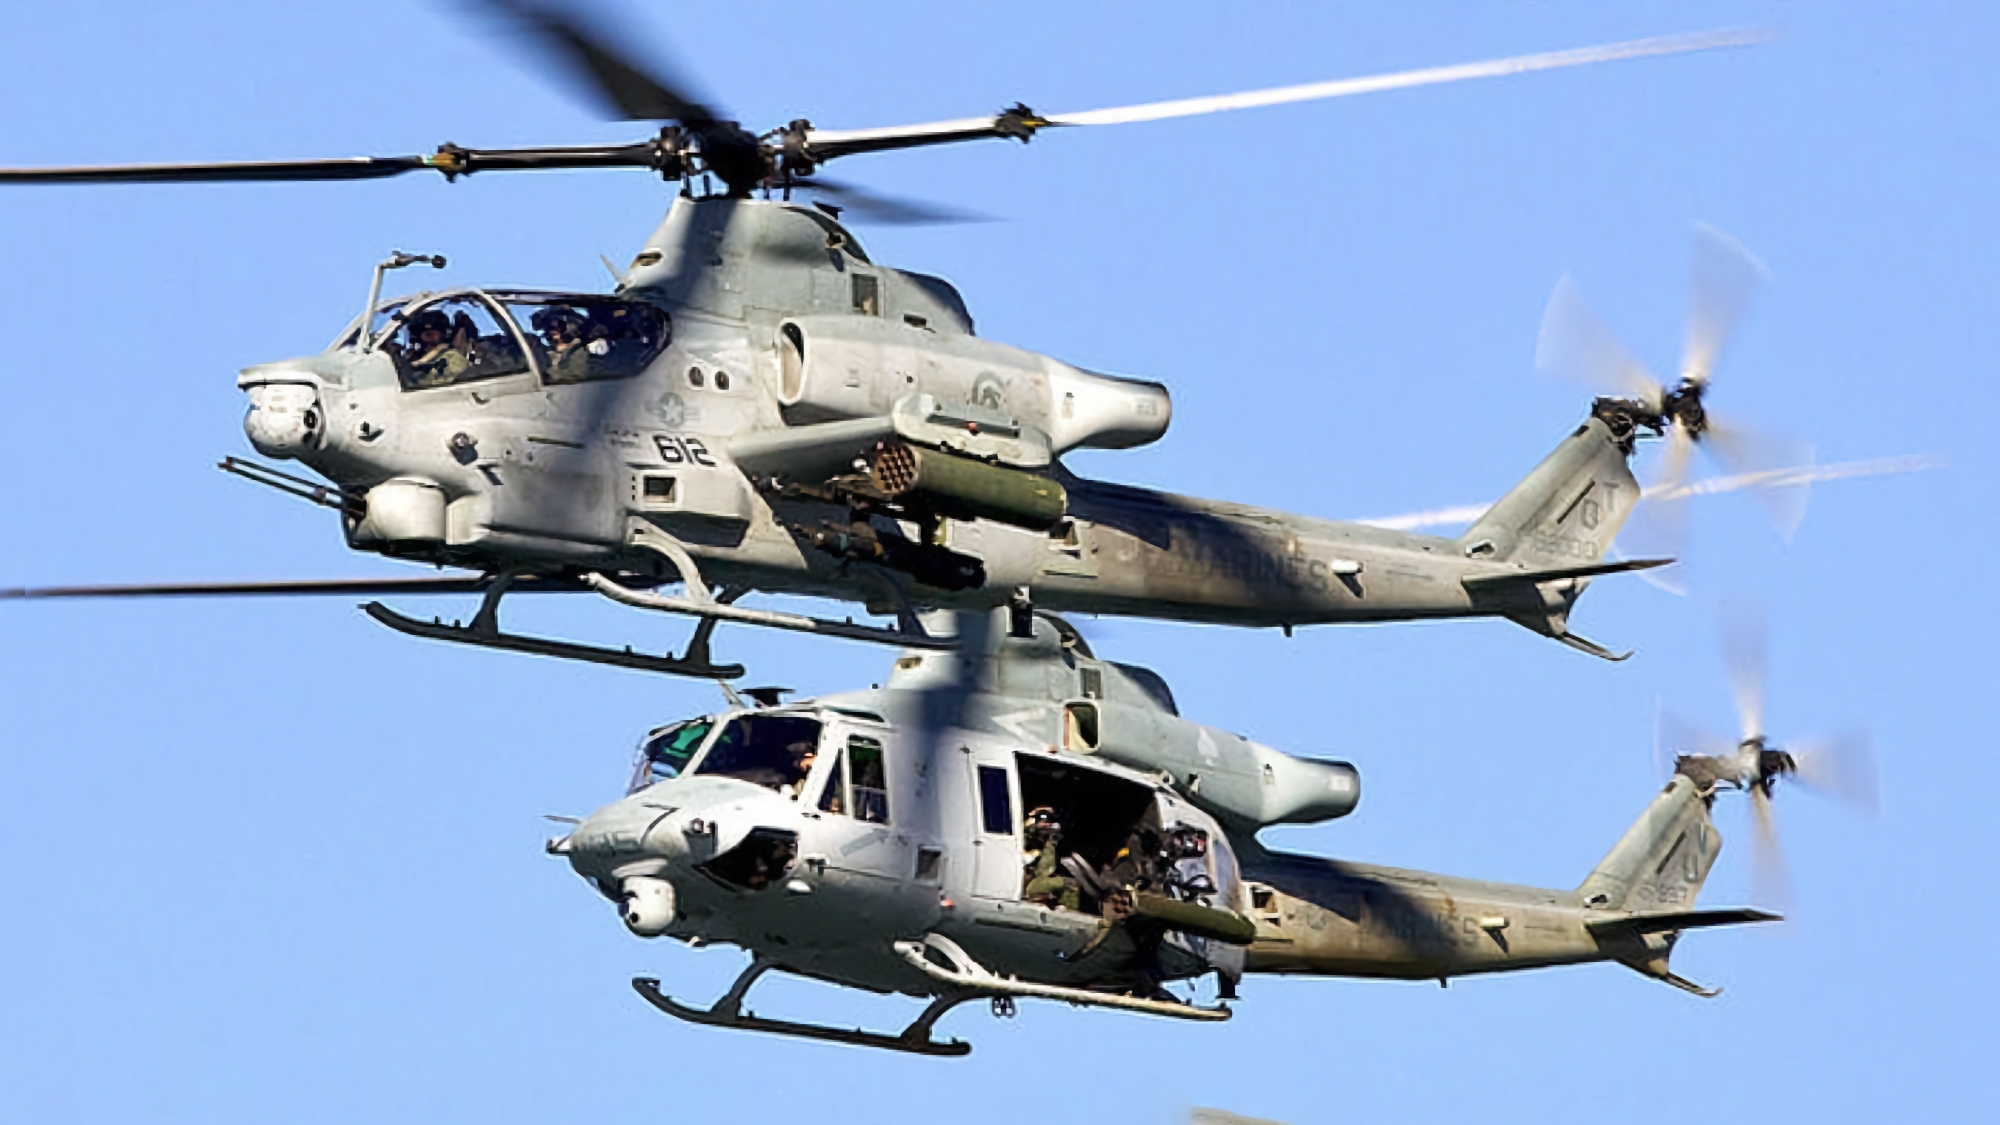 20 mm shells for M197 cannon and Hydra 70 missiles: Czech Republic is going to purchase armament for AH-1Z Viper and UH-1Y Venom helicopters.